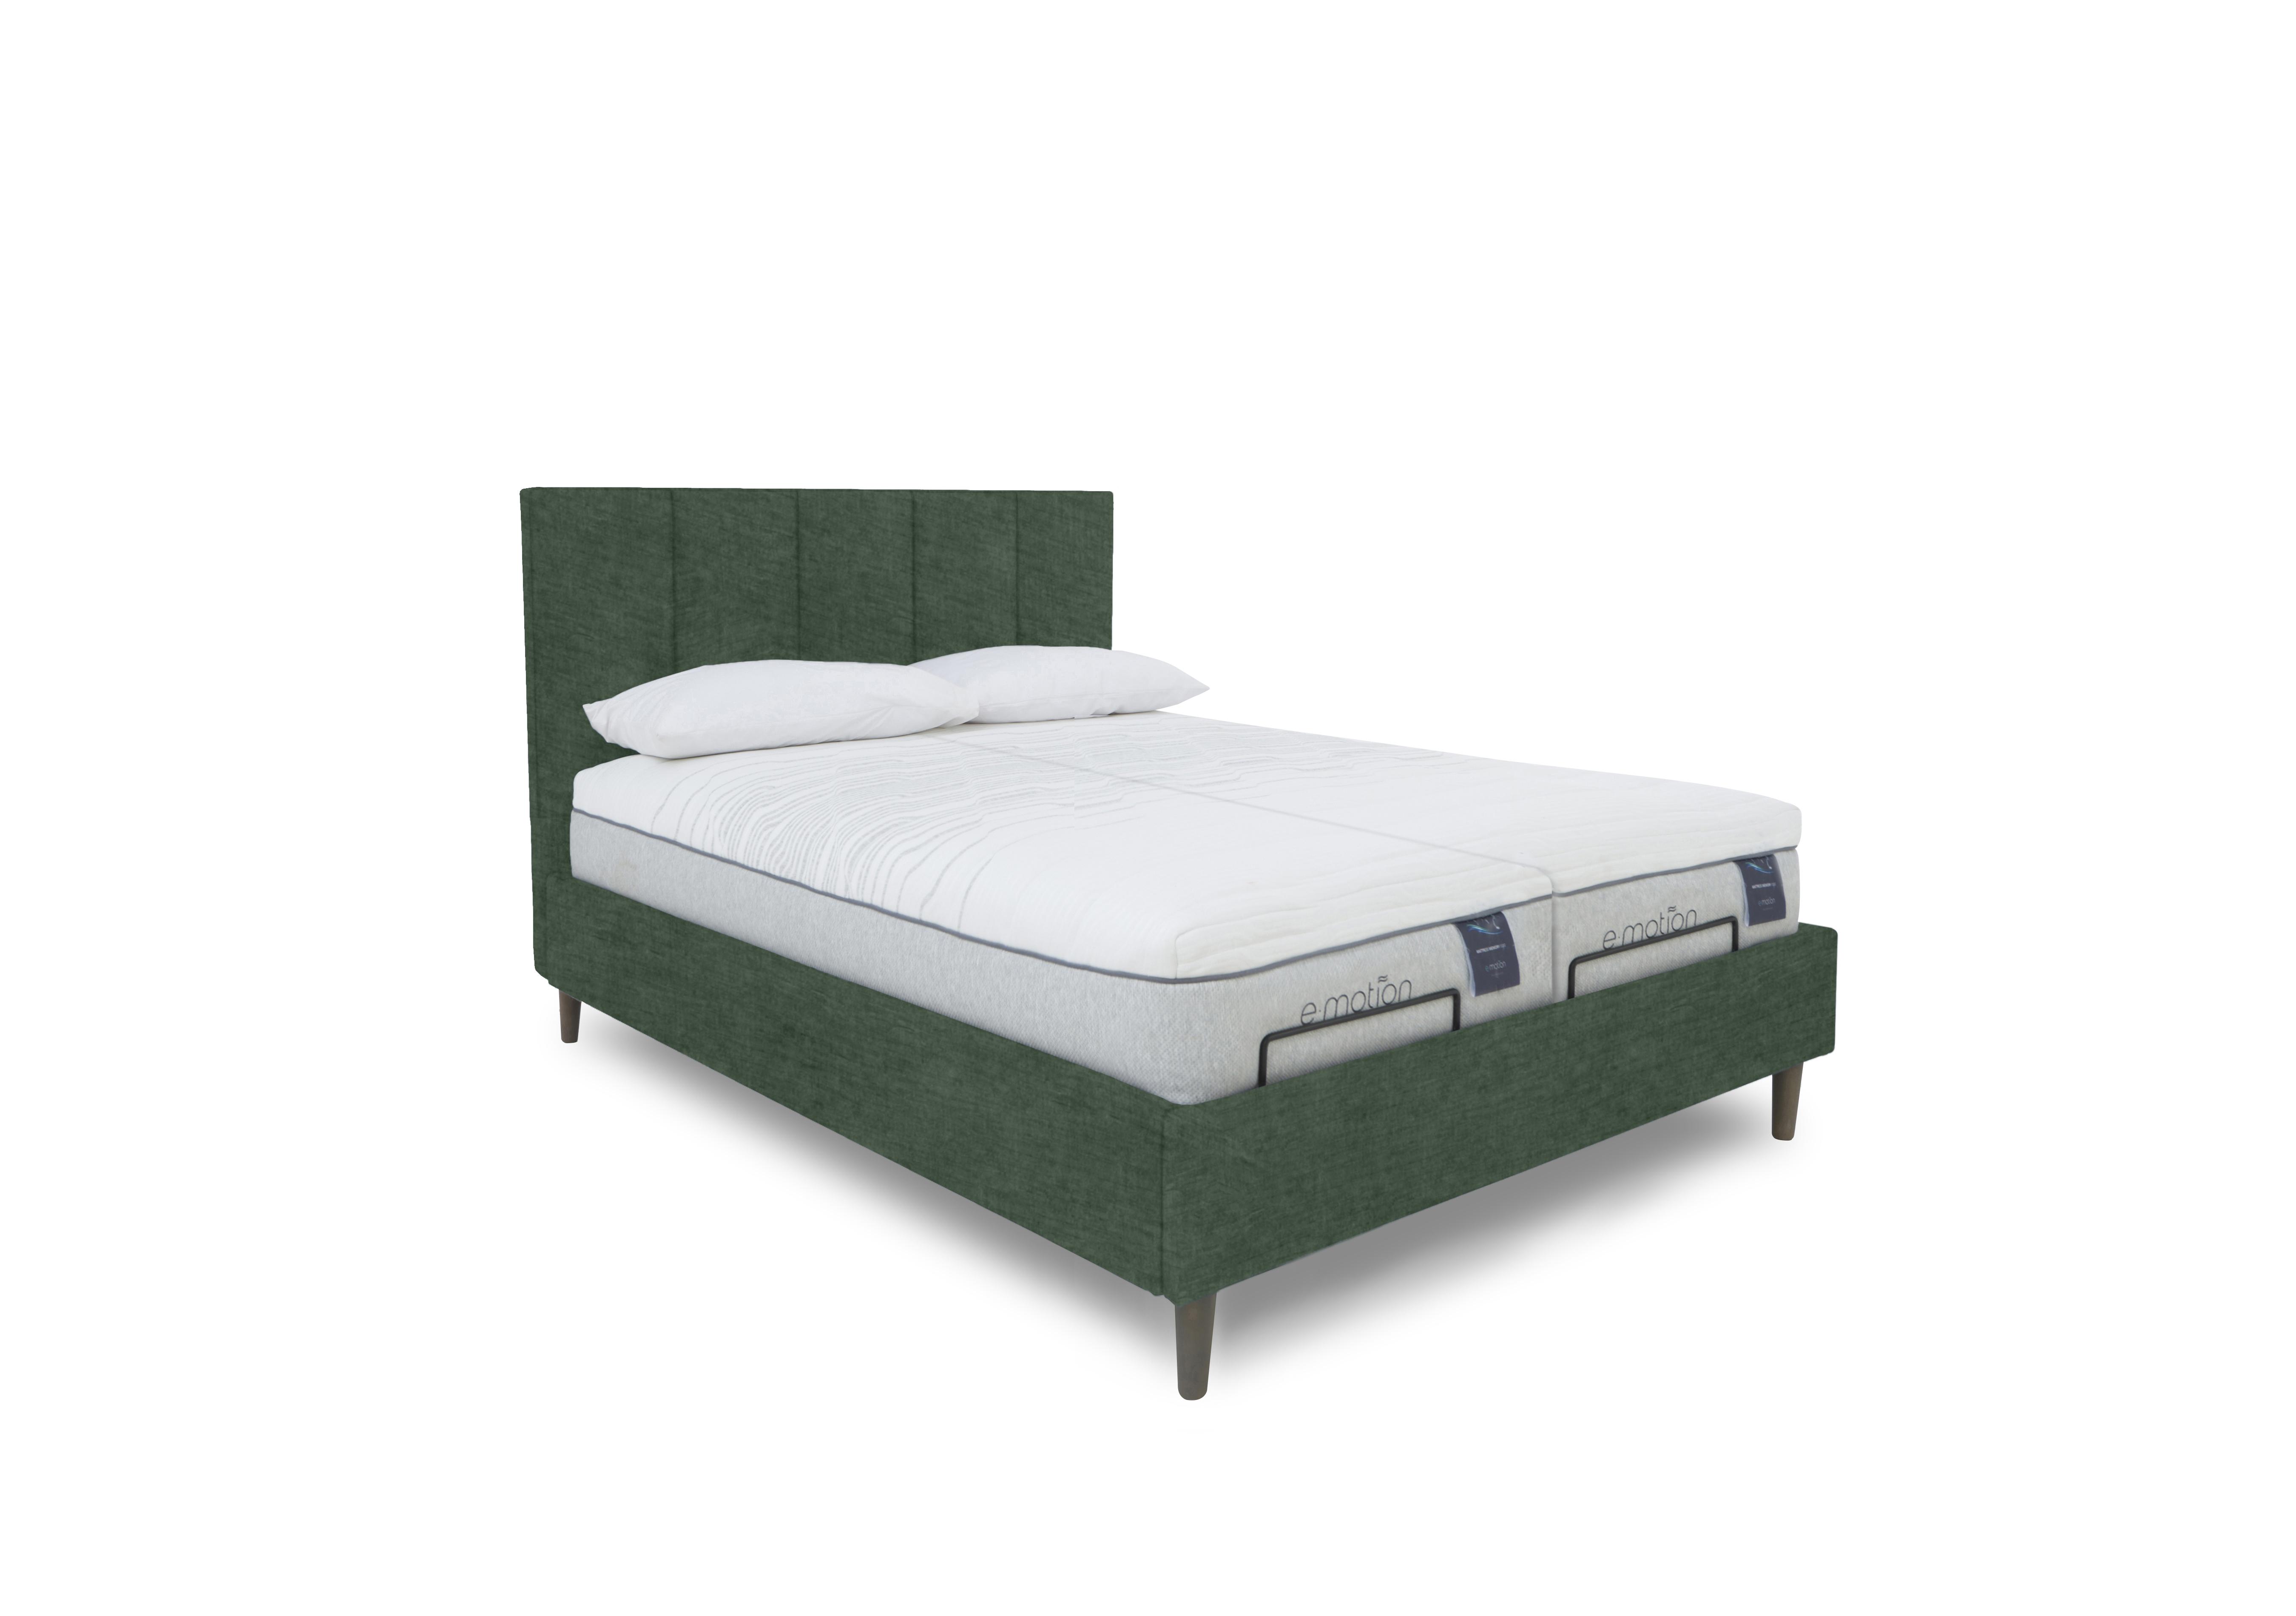 E-Motion Aiko Dual Adjustable Bed Frame with Massage Function in 502 Tormaline Green on Furniture Village